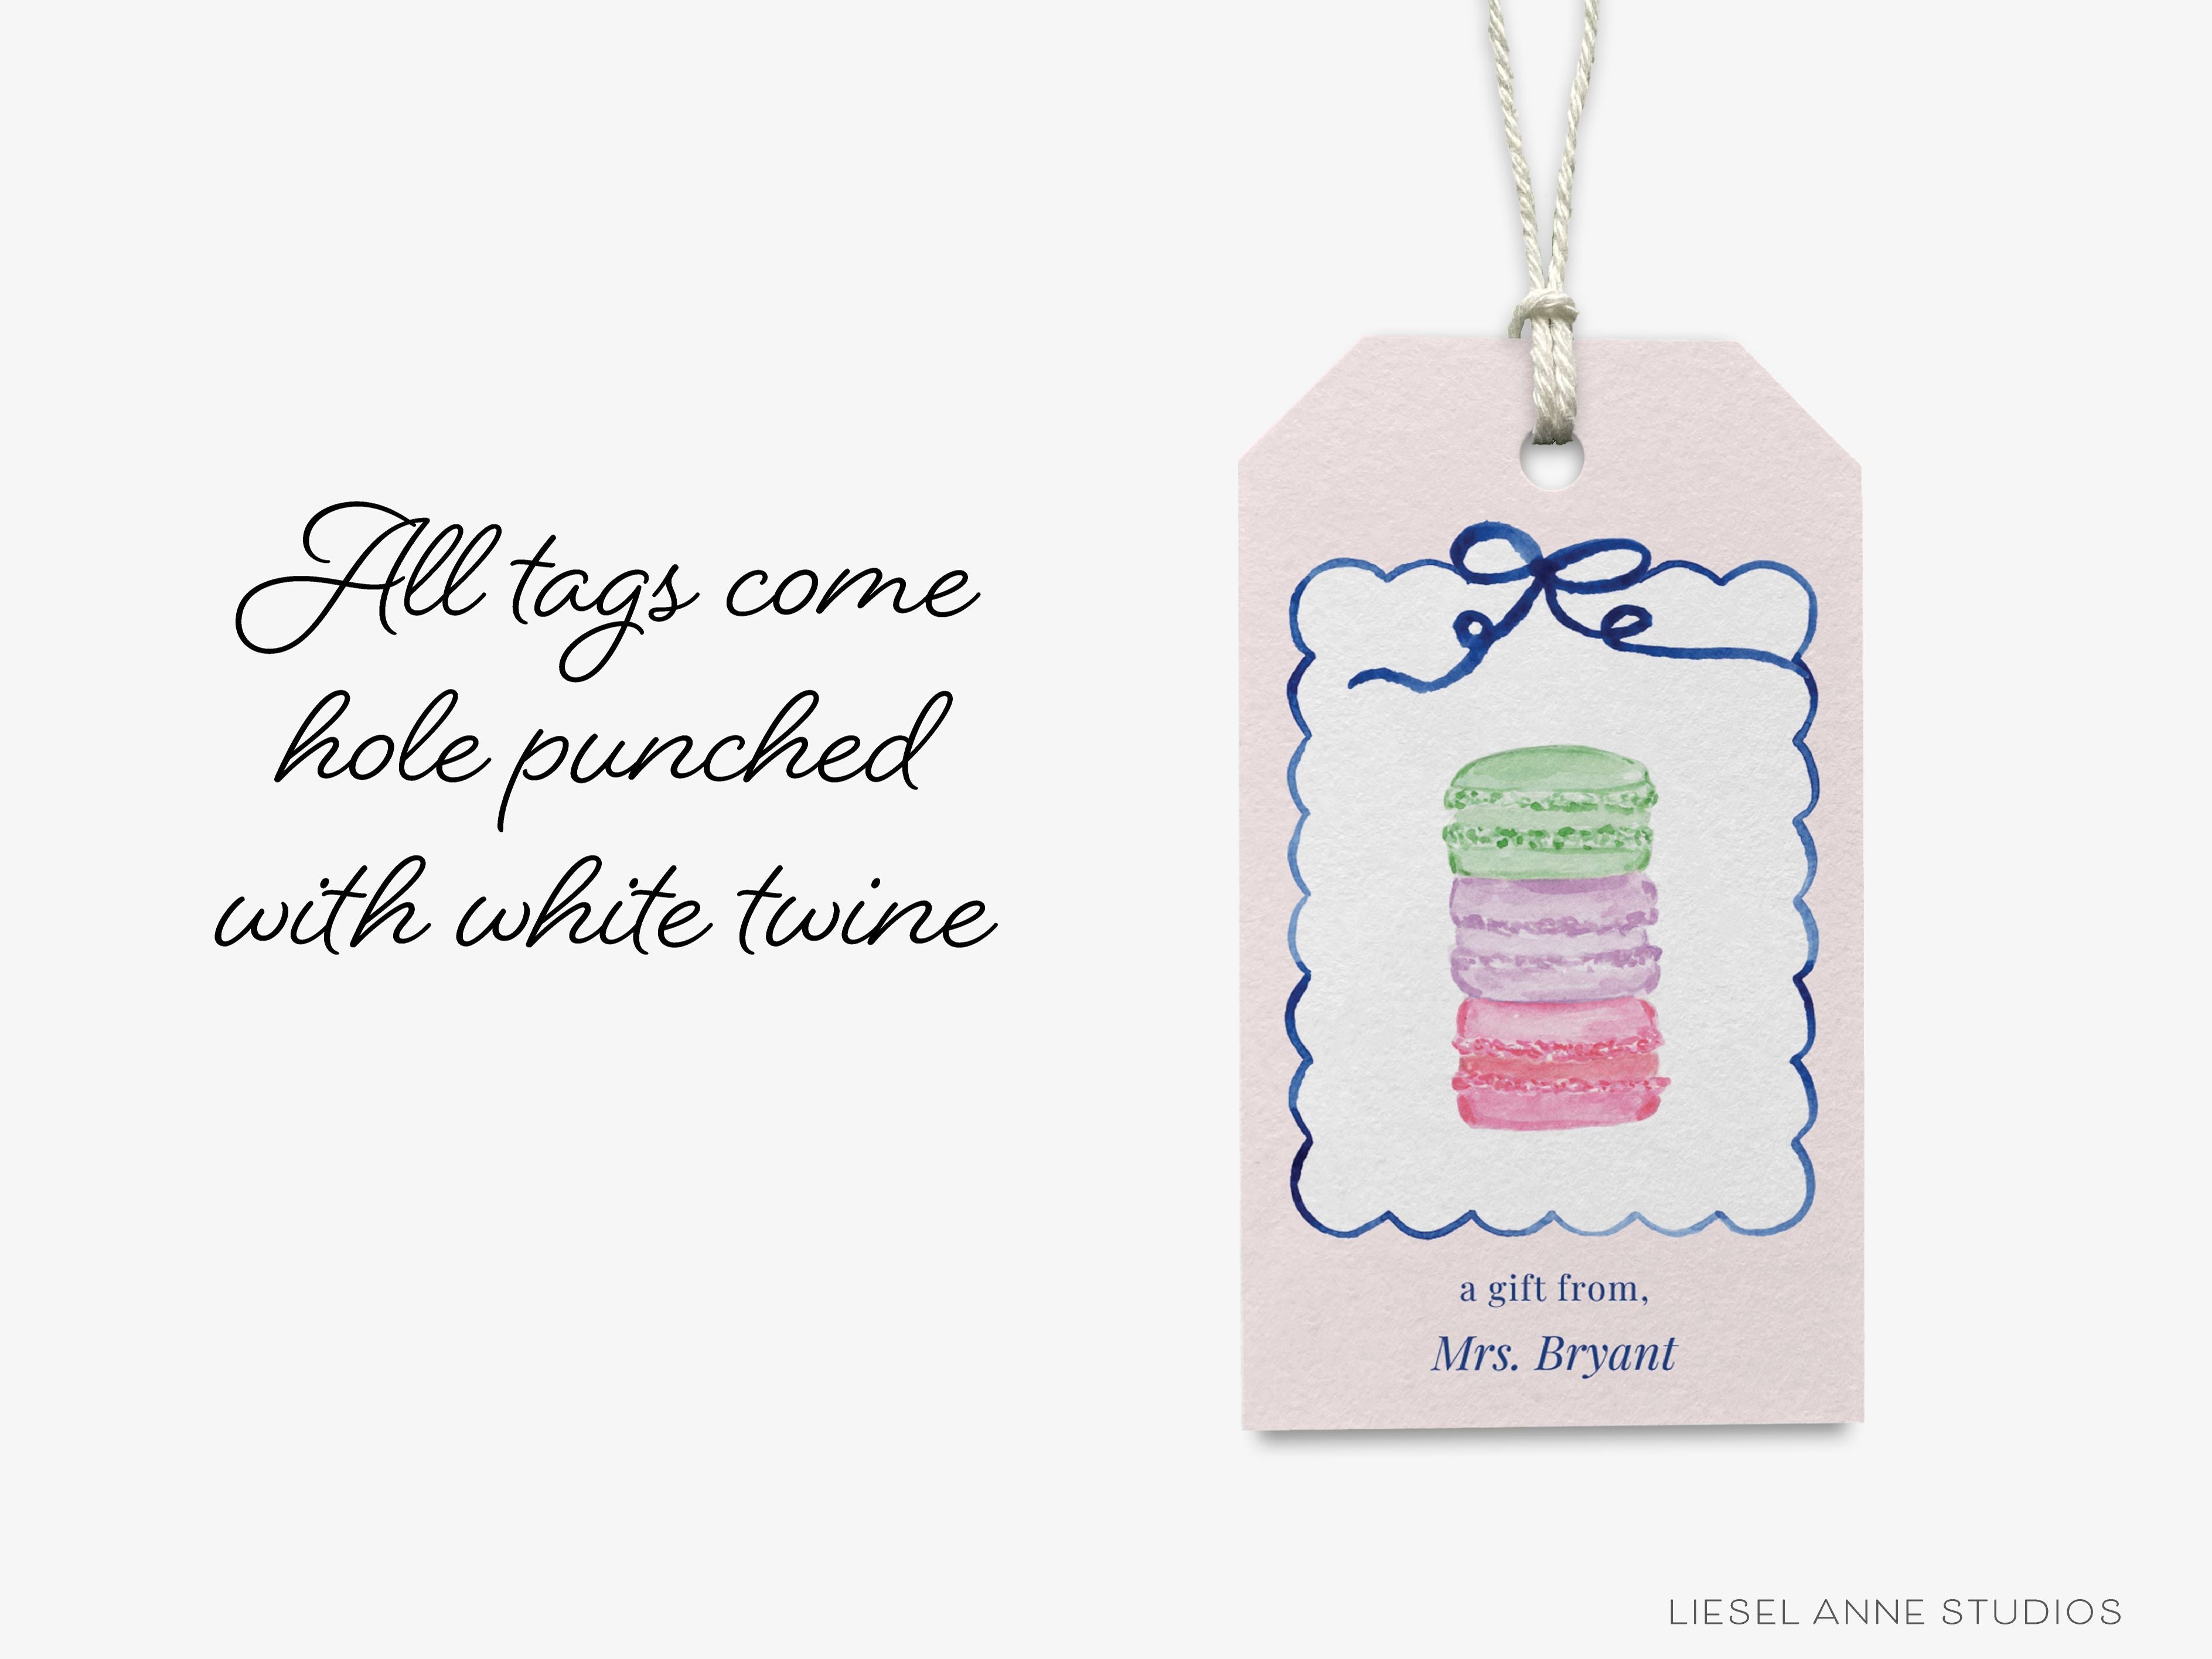 Personalized Macaron Stack Gift Tags-These gift tags come in sets, hole-punched with white twine and feature our hand-painted watercolor macarons, printed in the USA on 120lb textured stock. They make great tags for gifting or gifts for the sweet tooth lover in your life.-The Singing Little Bird